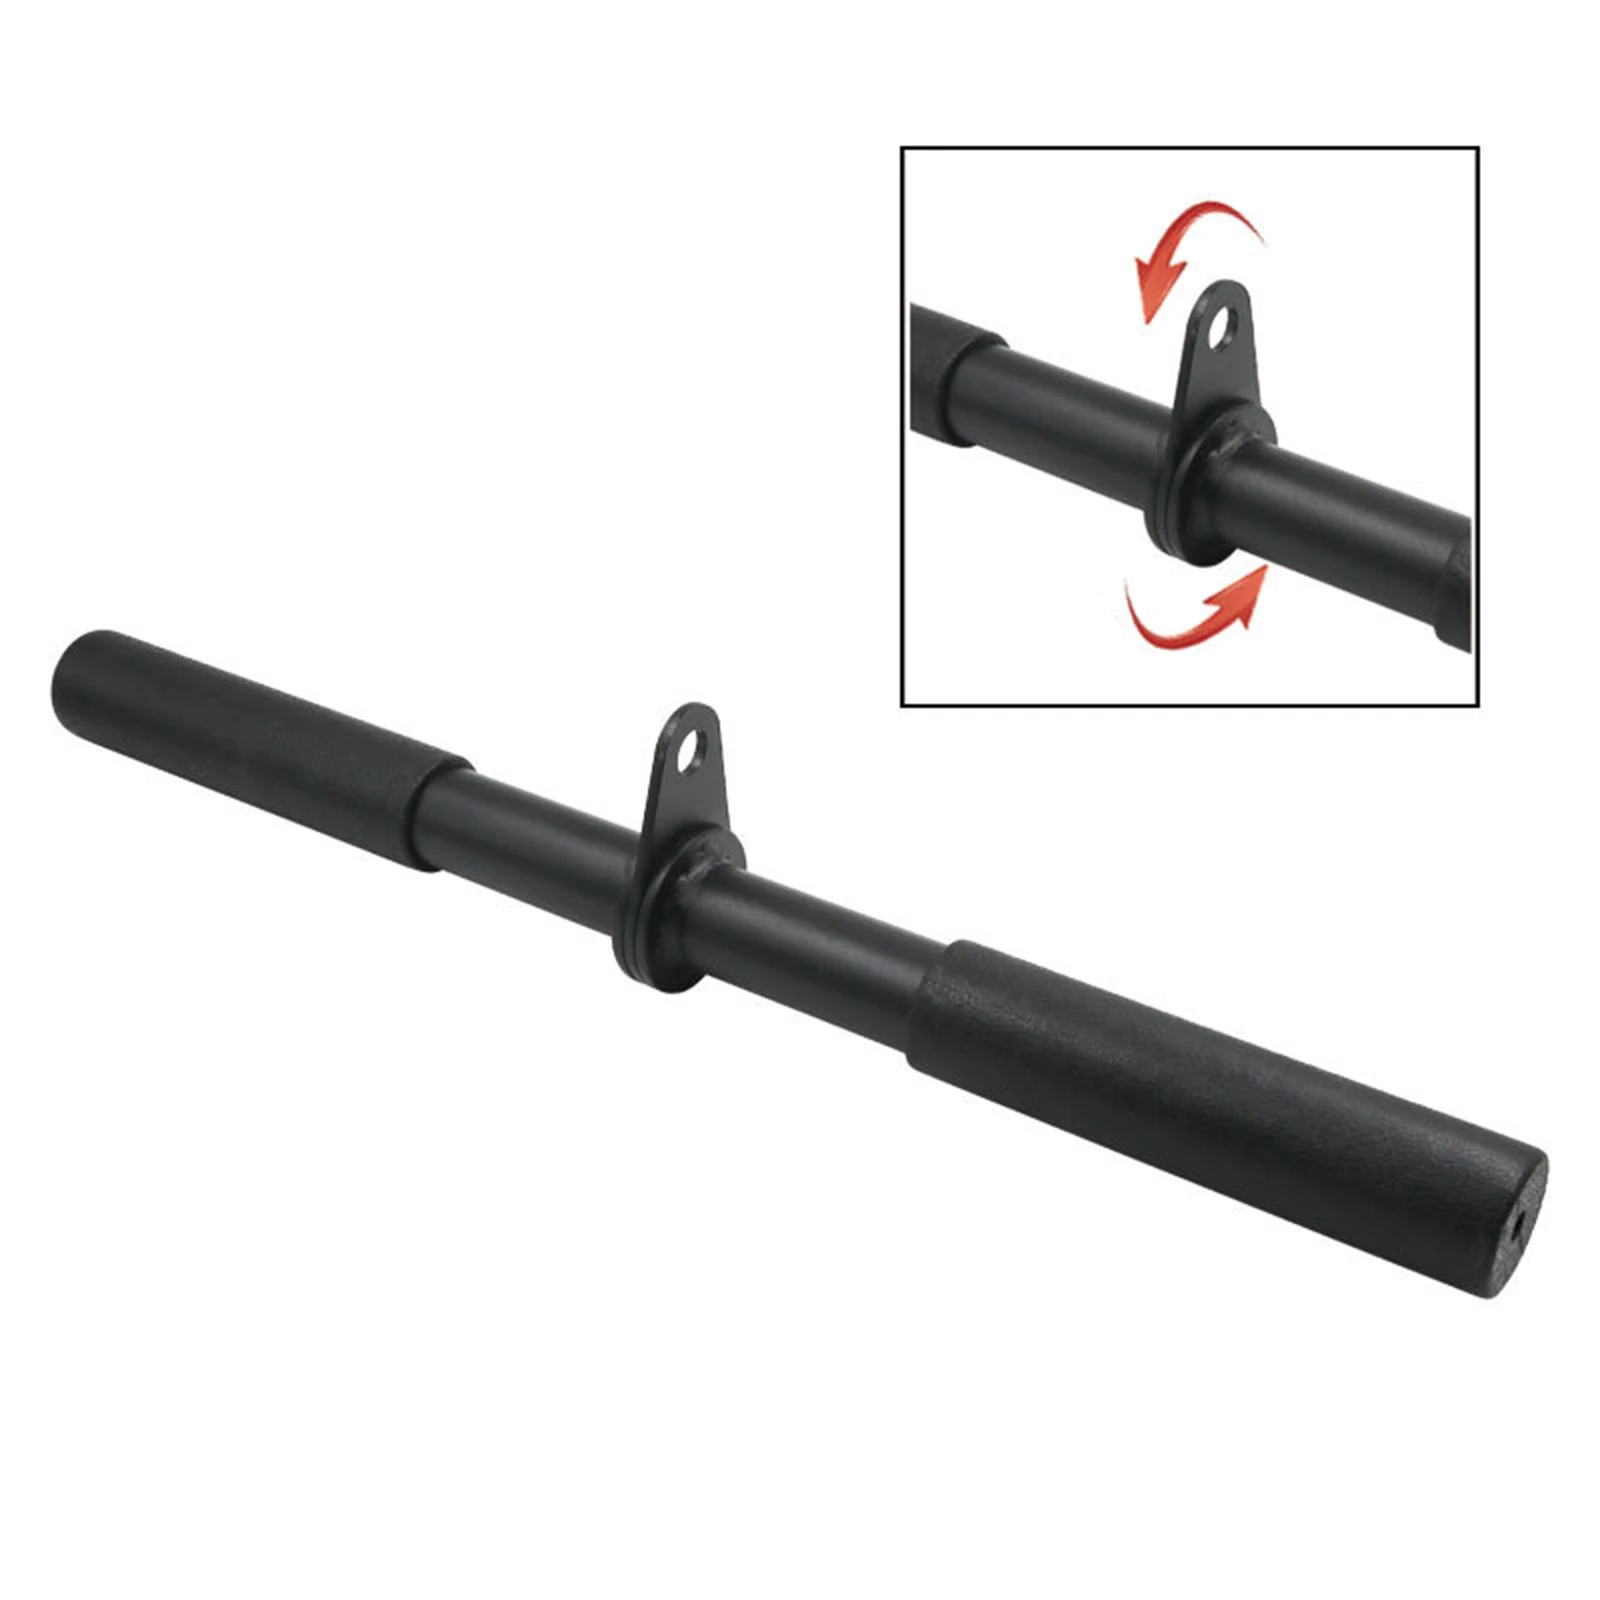 42.5cm Fitness Gym Home DIY Machine Attachments Biceps Triceps Back Blaster T-Bar Pull Down Bar Weights Lose Workout